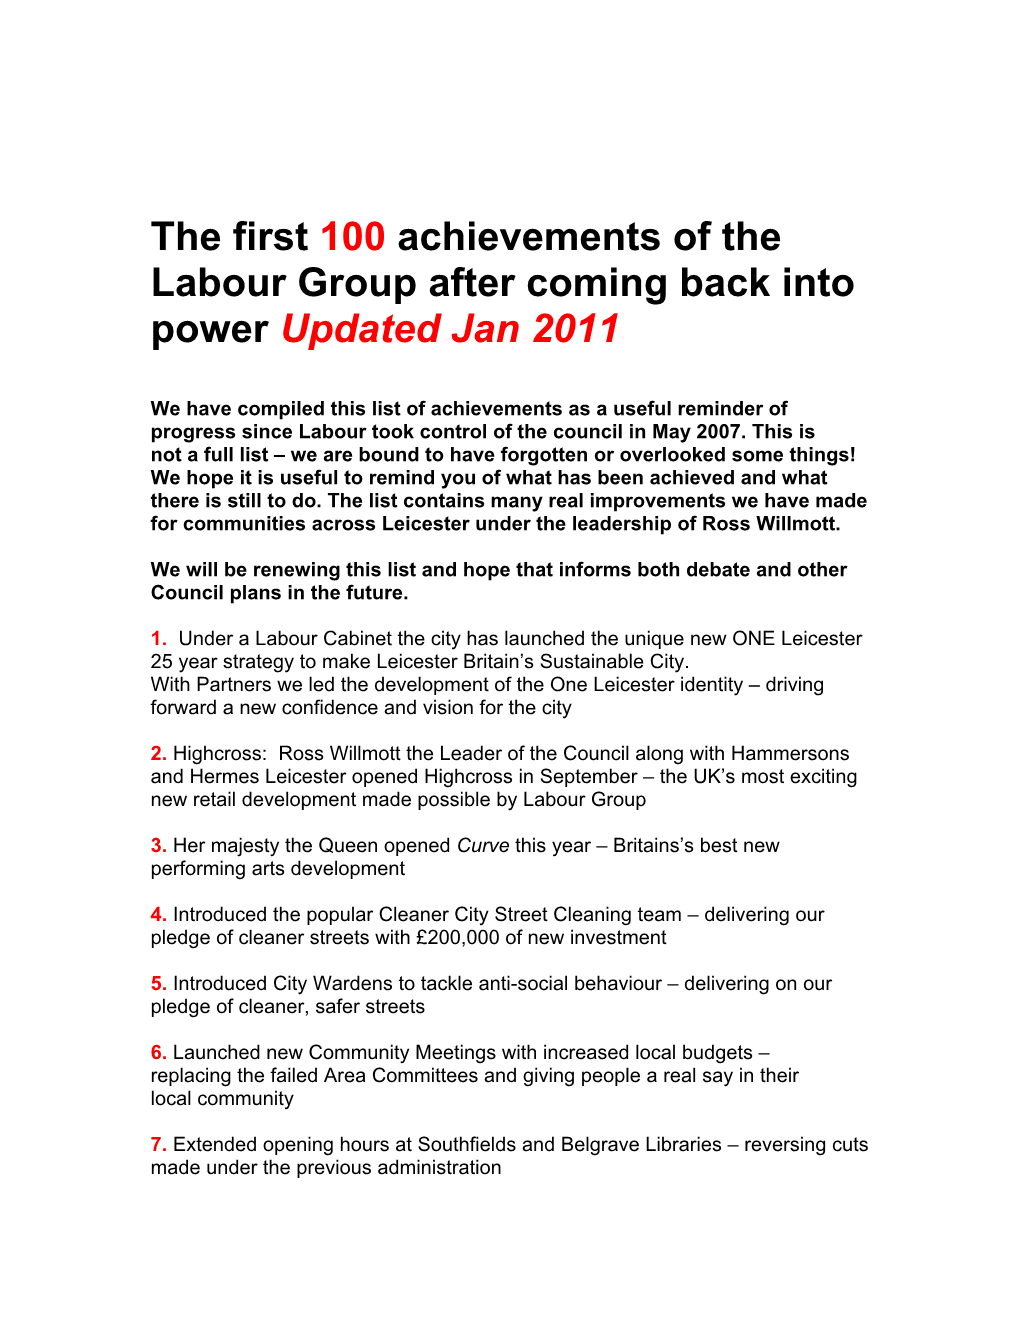 The First 100 Achievements of the Labour Group After Coming Back Into Power Updated Jan 2011